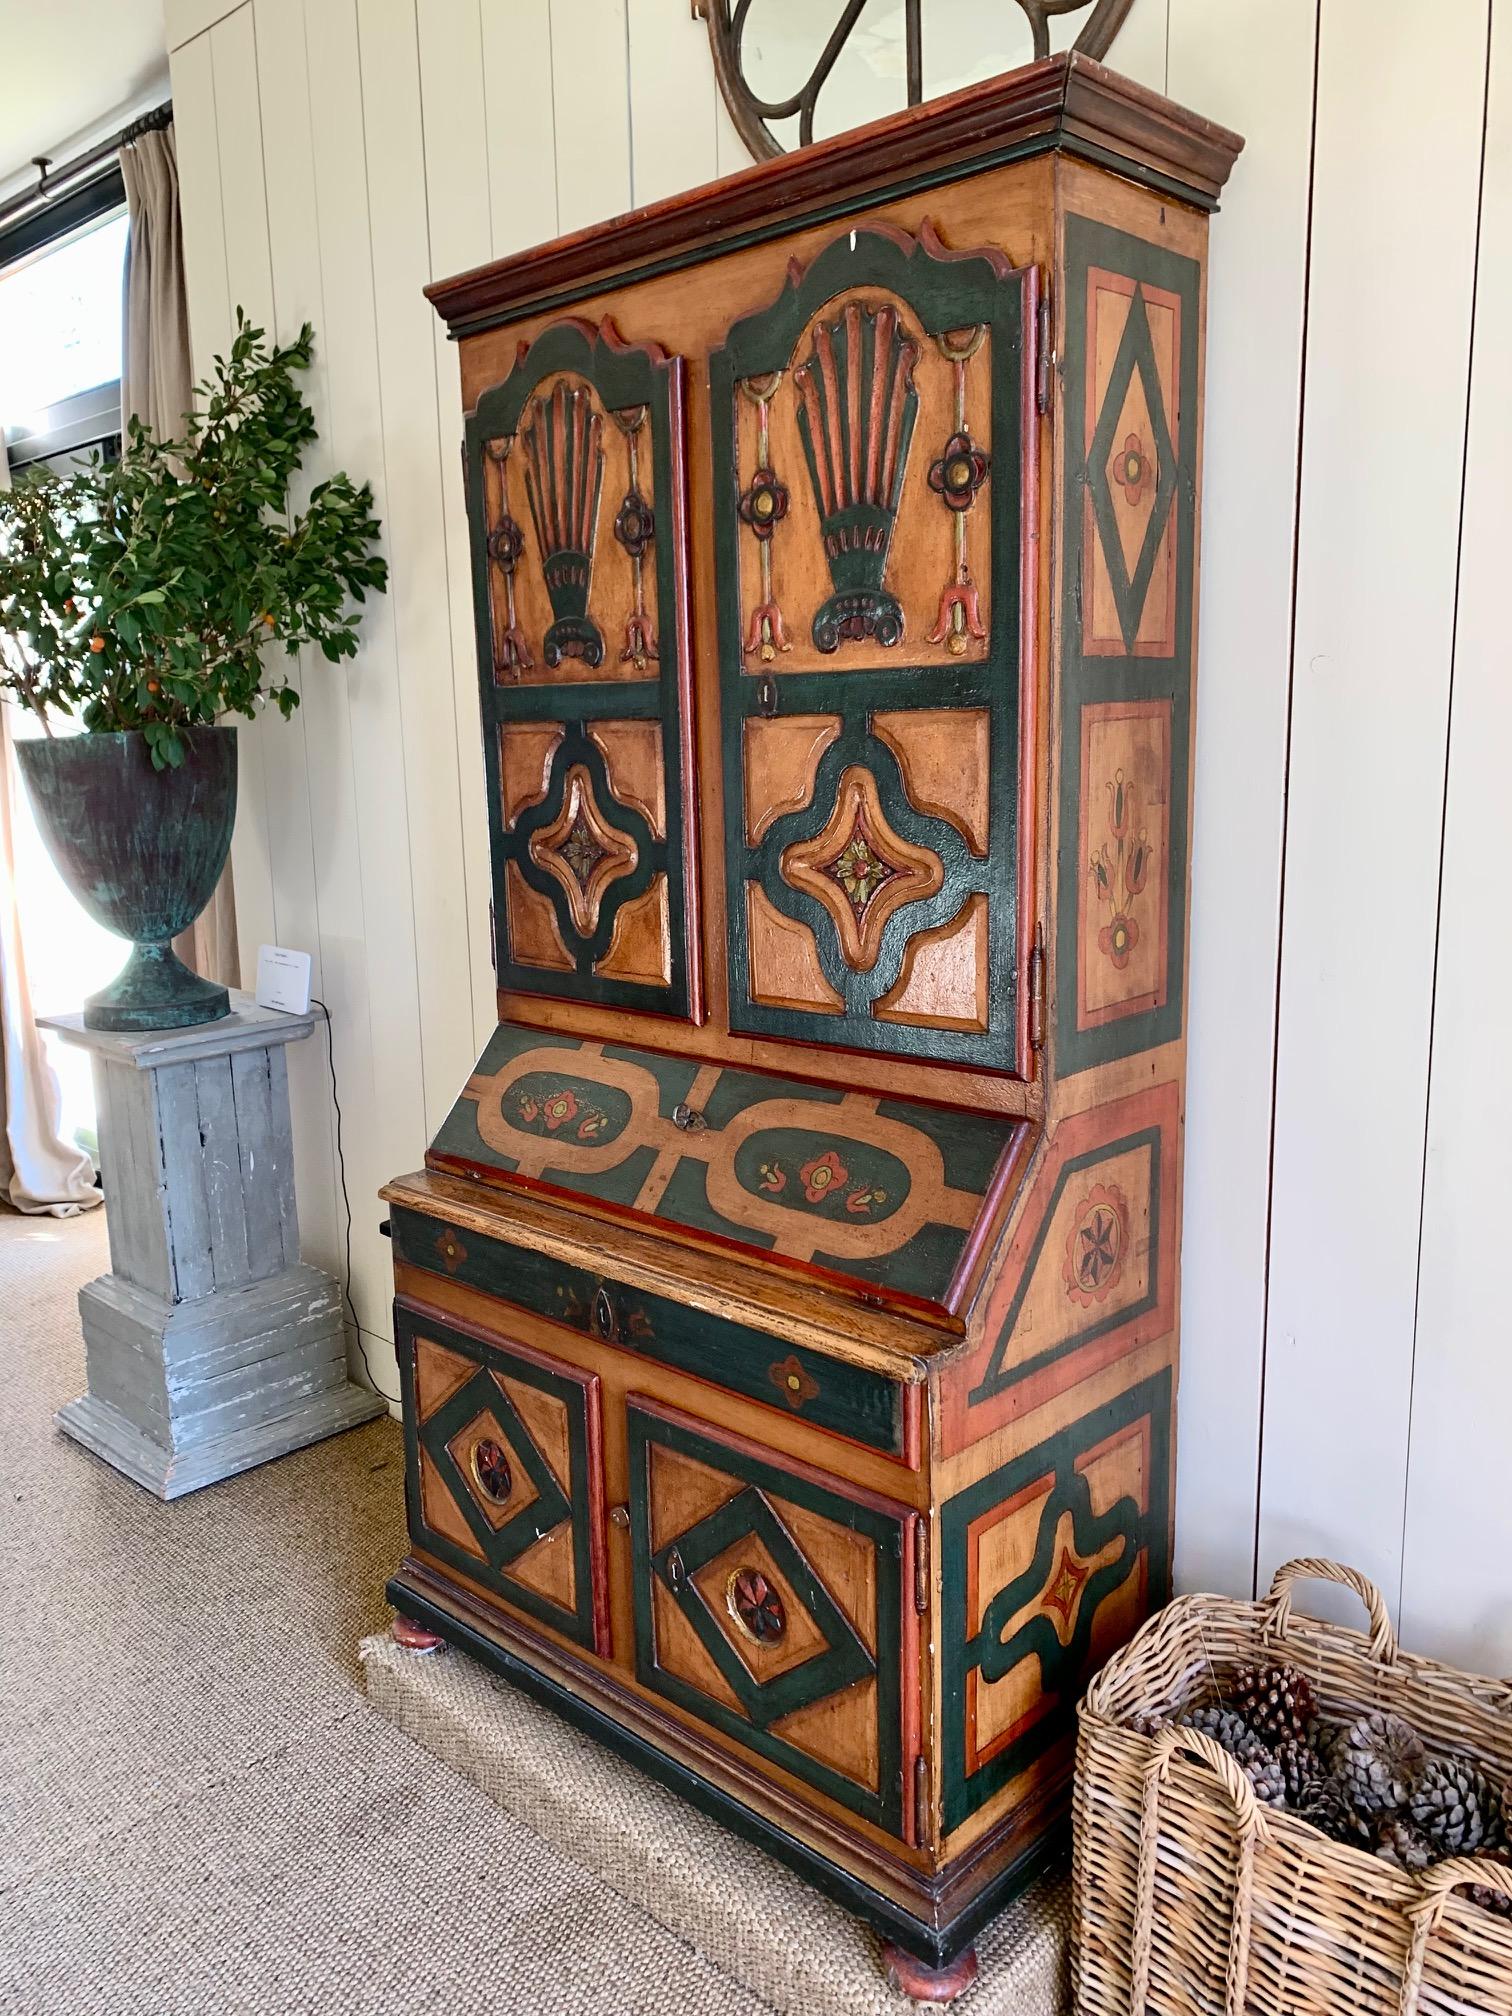 19th century wonderful Aragonese Spanish desk bureau, bookcase, high-quality Spanish rustic furniture in pine wood with beautiful polychrome work. and hand-carved wood, with geometric and floral motifs, a piece of furniture built in a single piece,